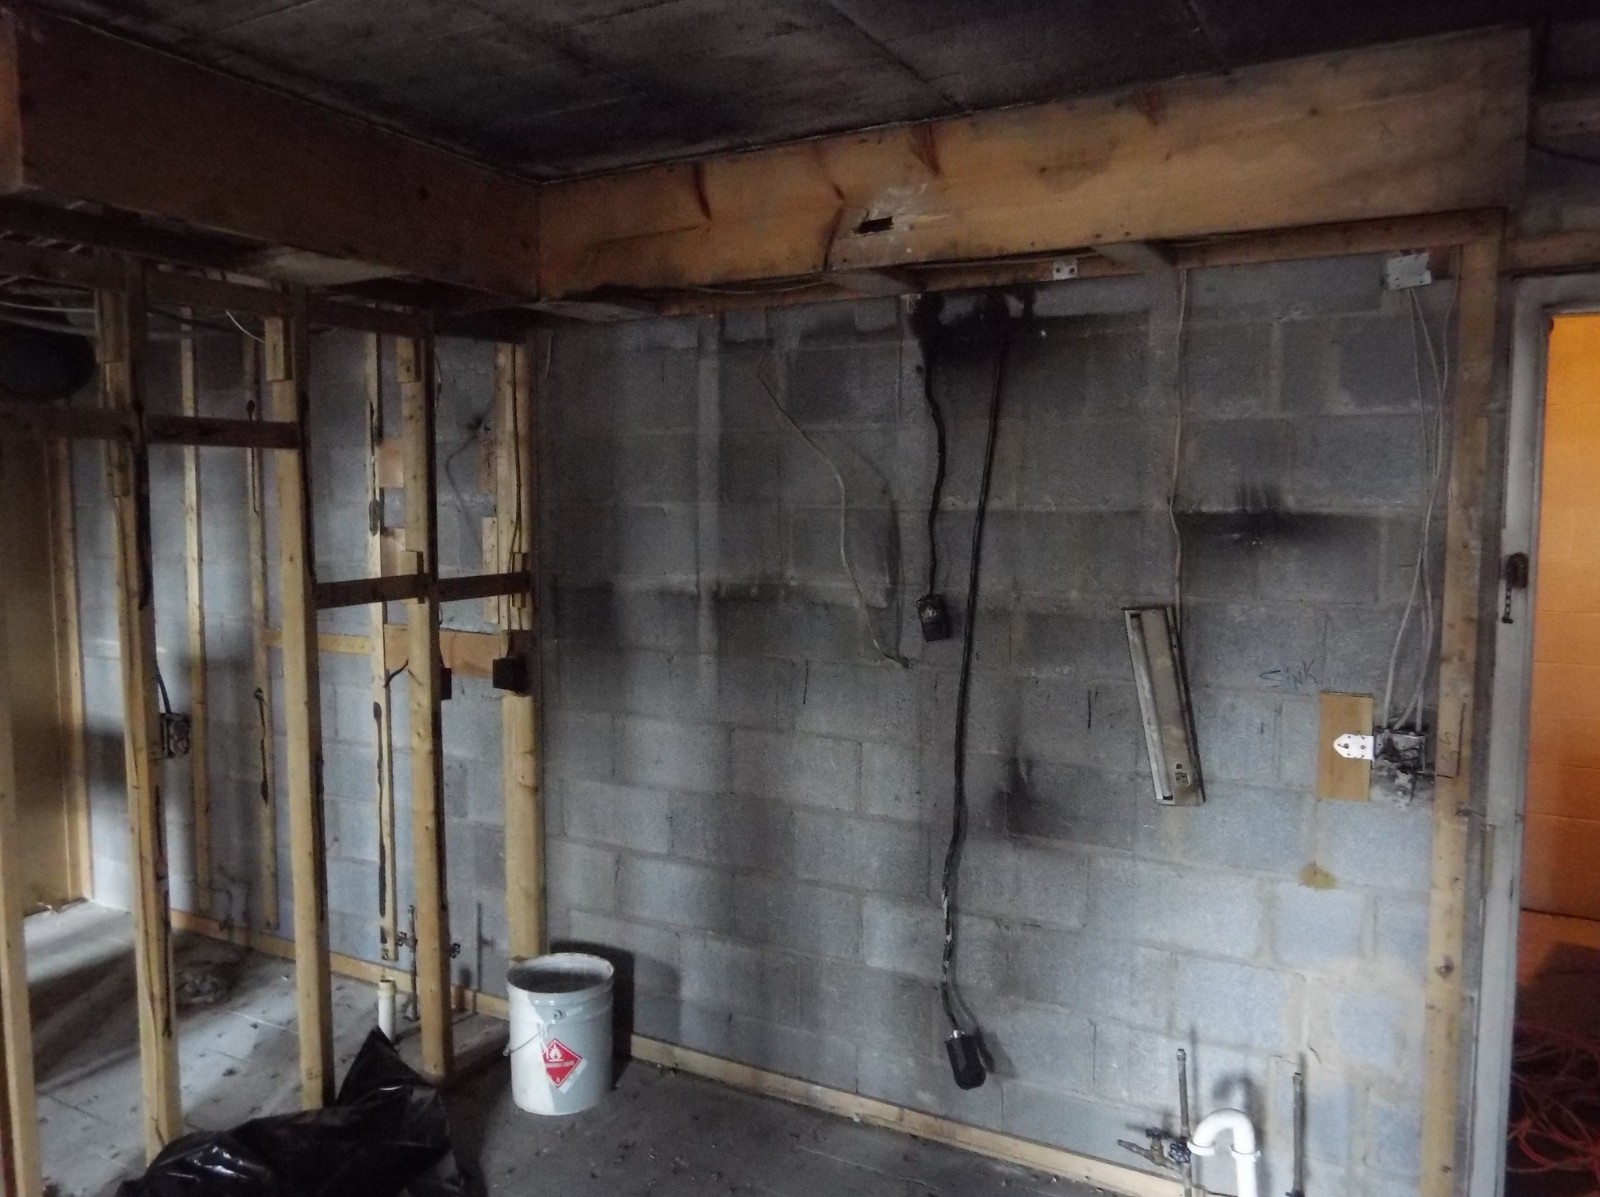 Fire damage is one of our many specialties. SERVPRO of Ebensburg has the training and equipment to properly restore your home or business to pre-fire condition.